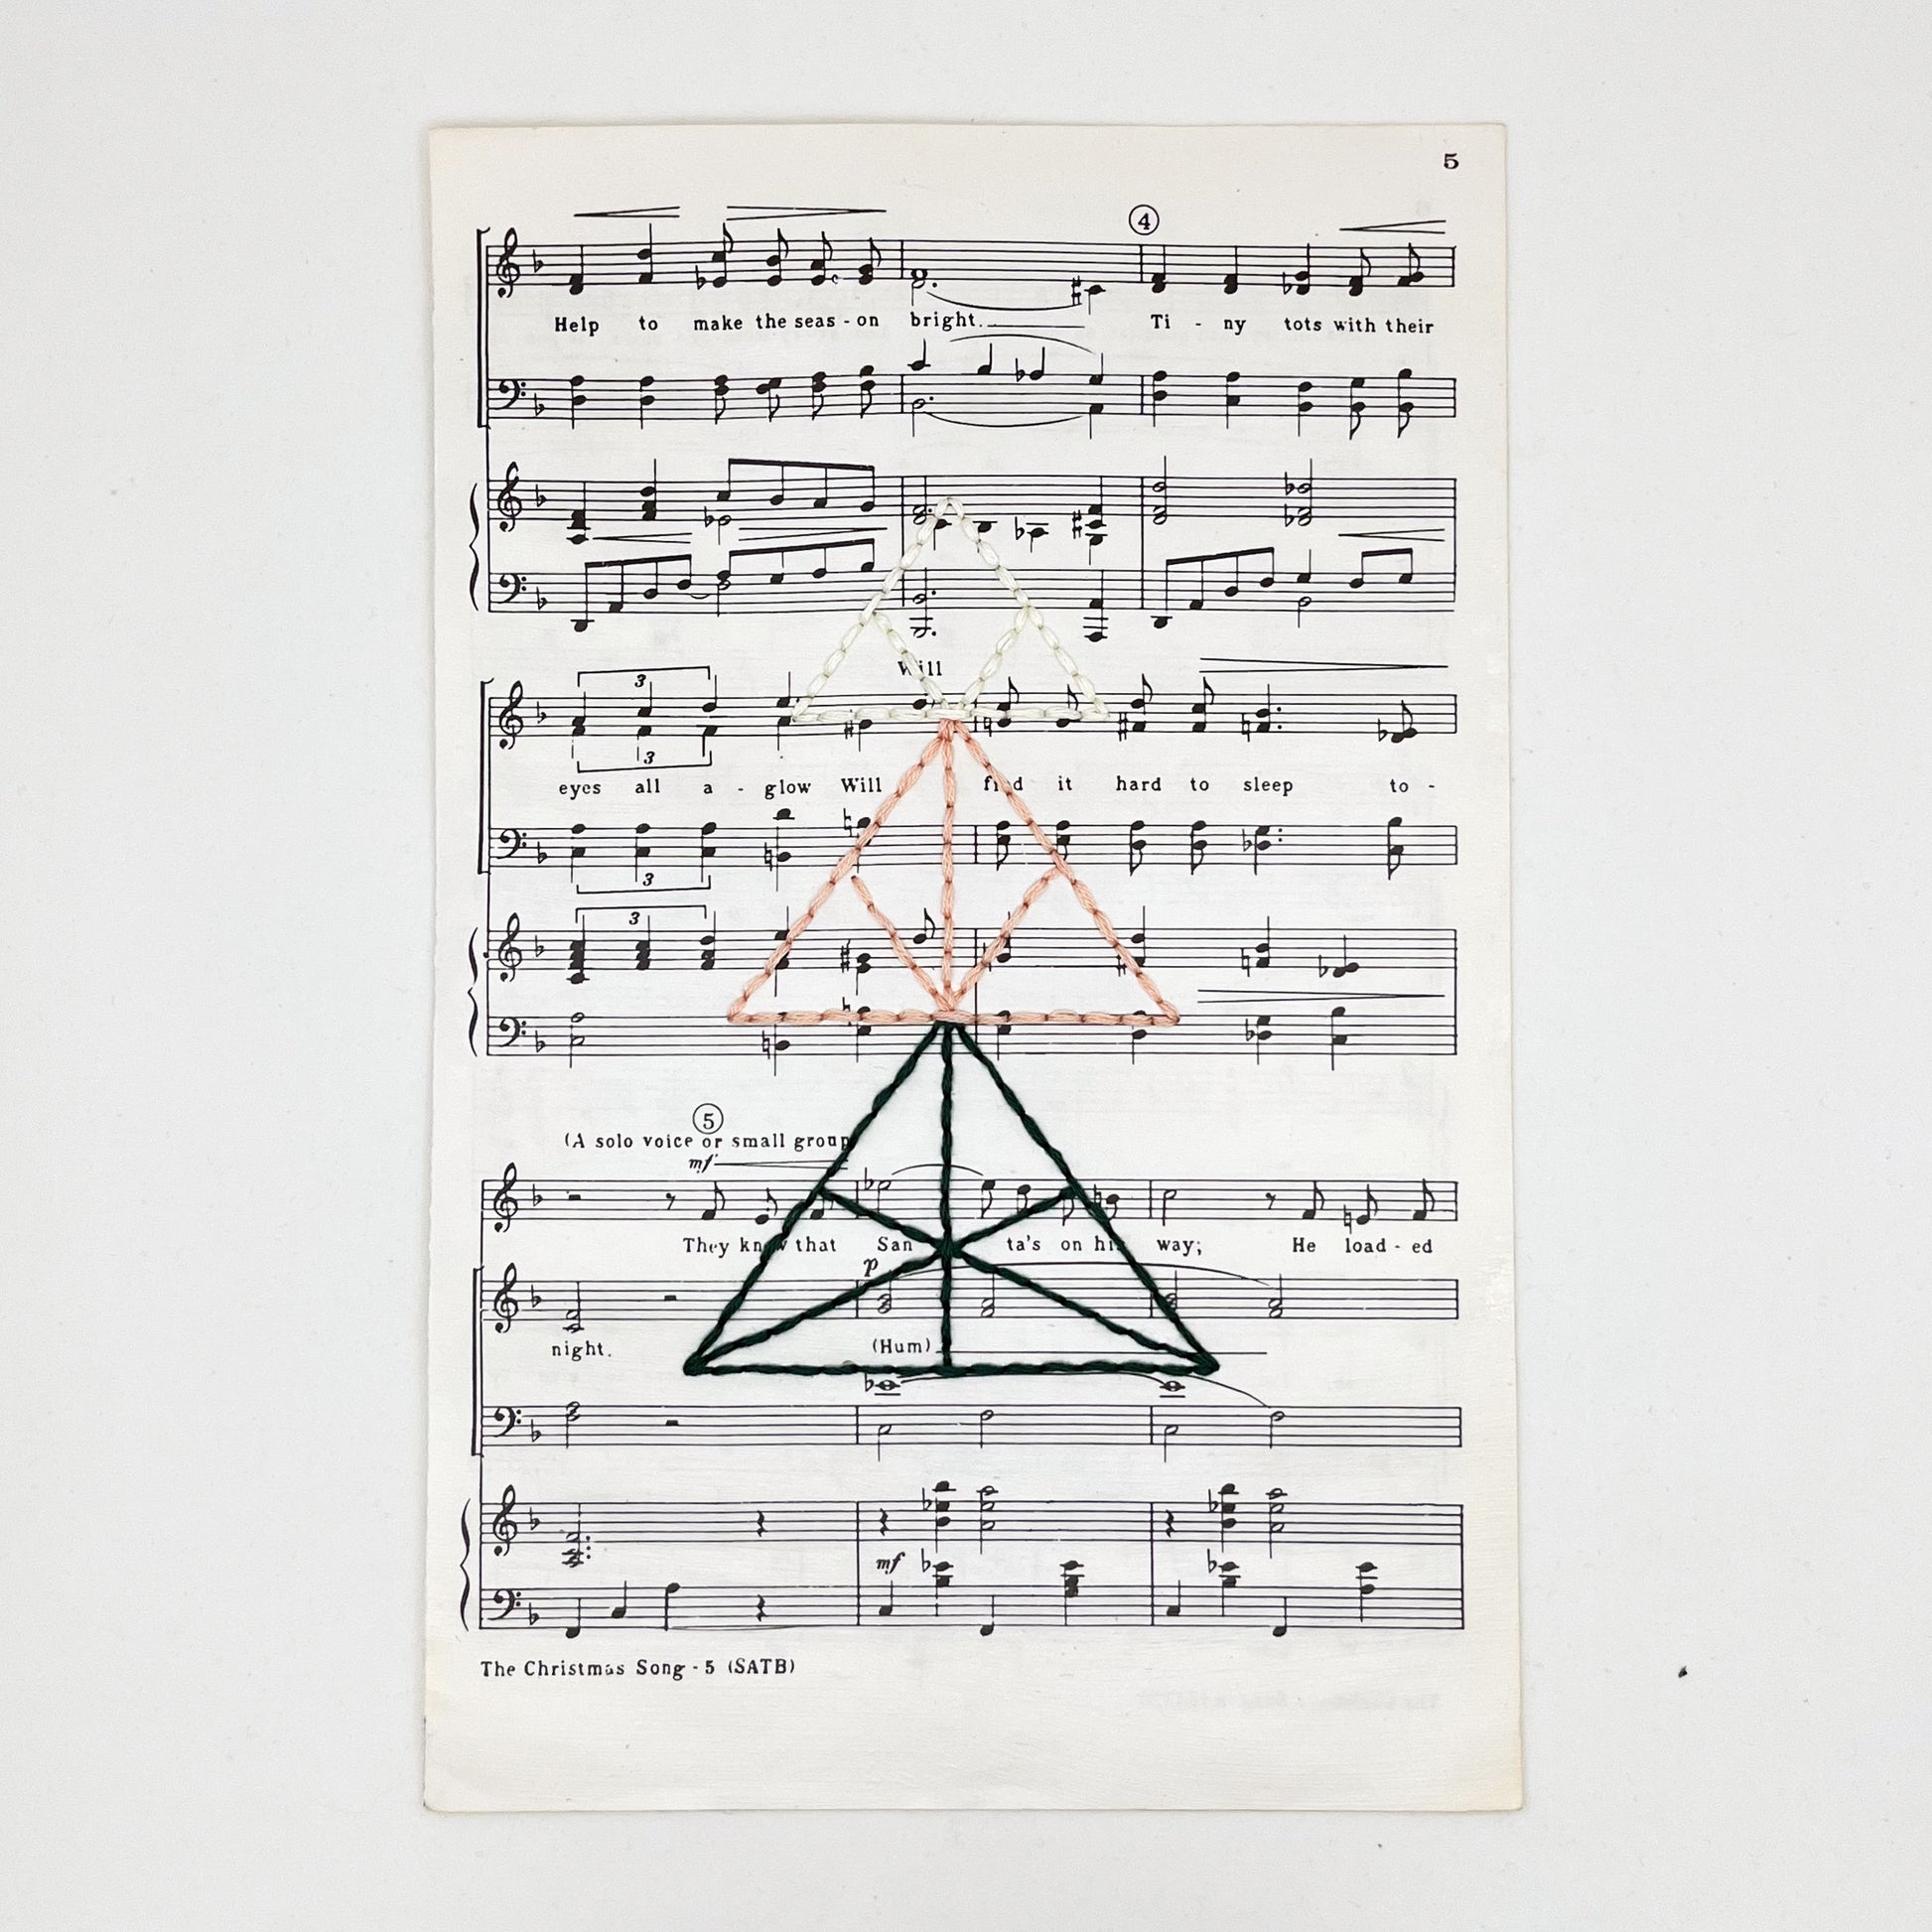 sheet music from "The Christmas Song", hand stitched over with a Christmas tree made from triangles, in green, peach and ivory thread